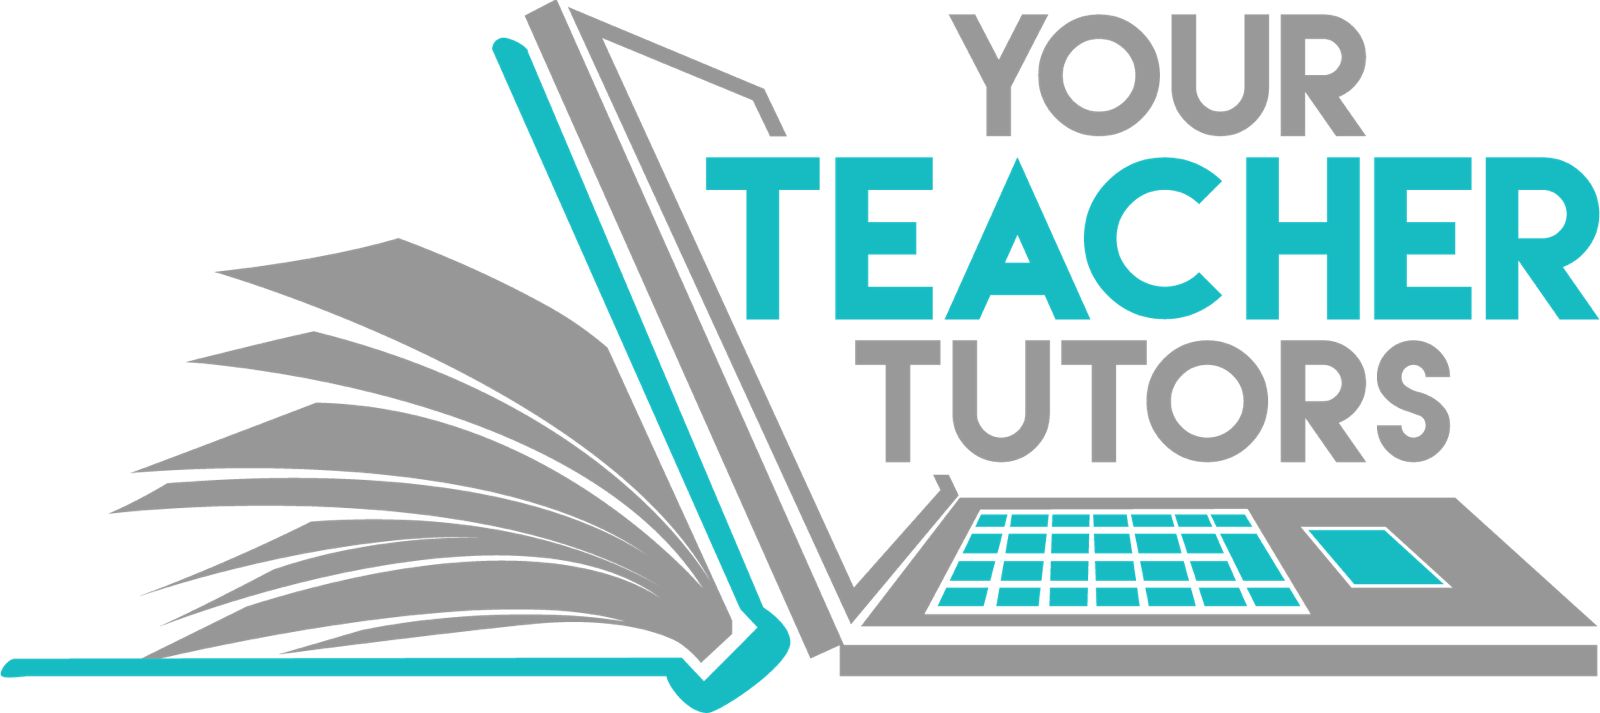 For which grade levels are you qualified to provide tutoring services?